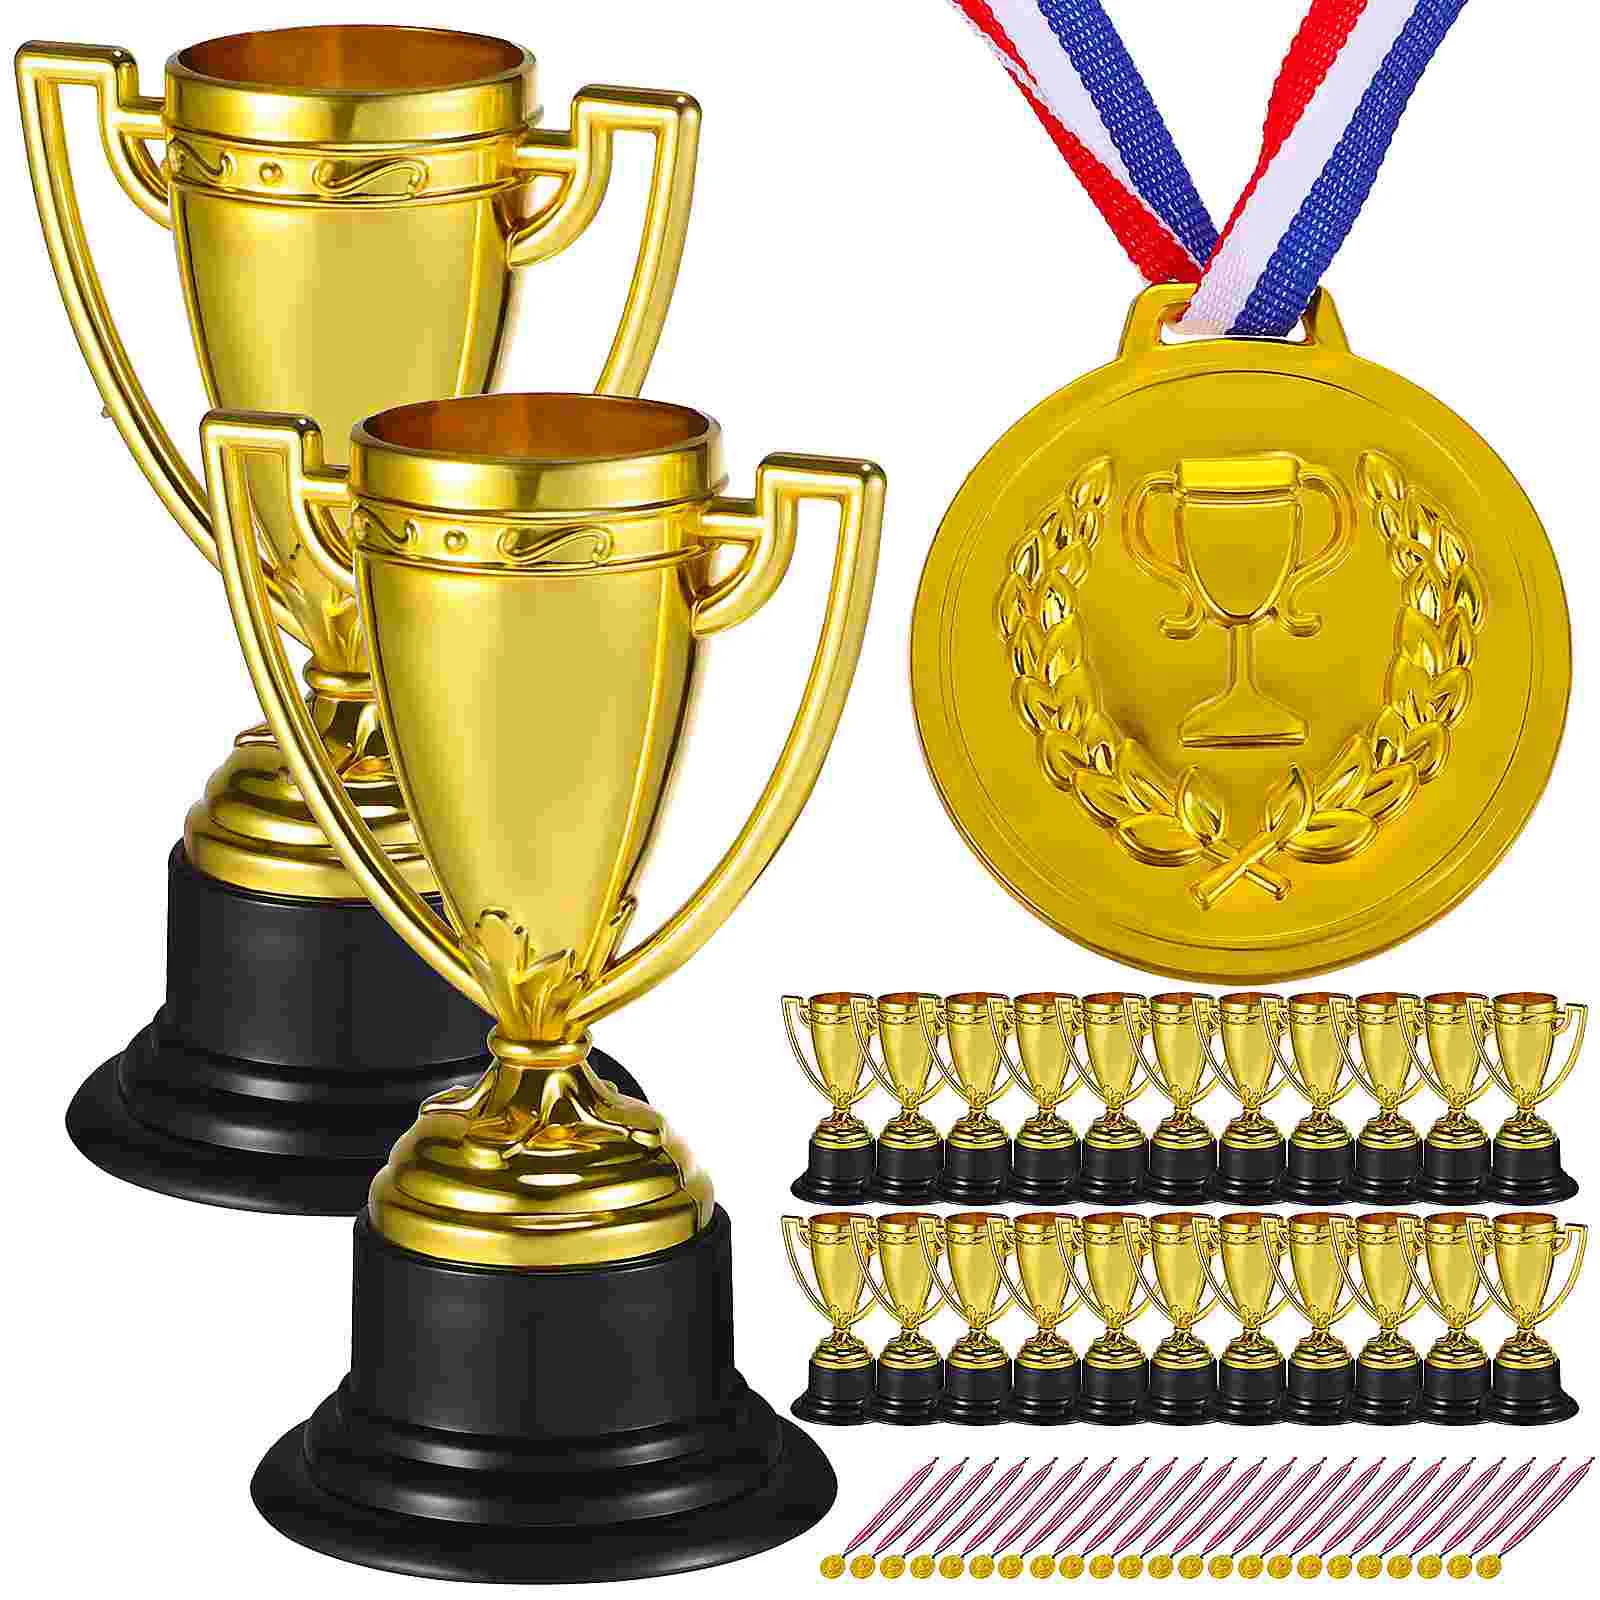 

24 Sets Trophy Cups Competition Award Cups First Place Trophy Cups Medal Models for Sports Events